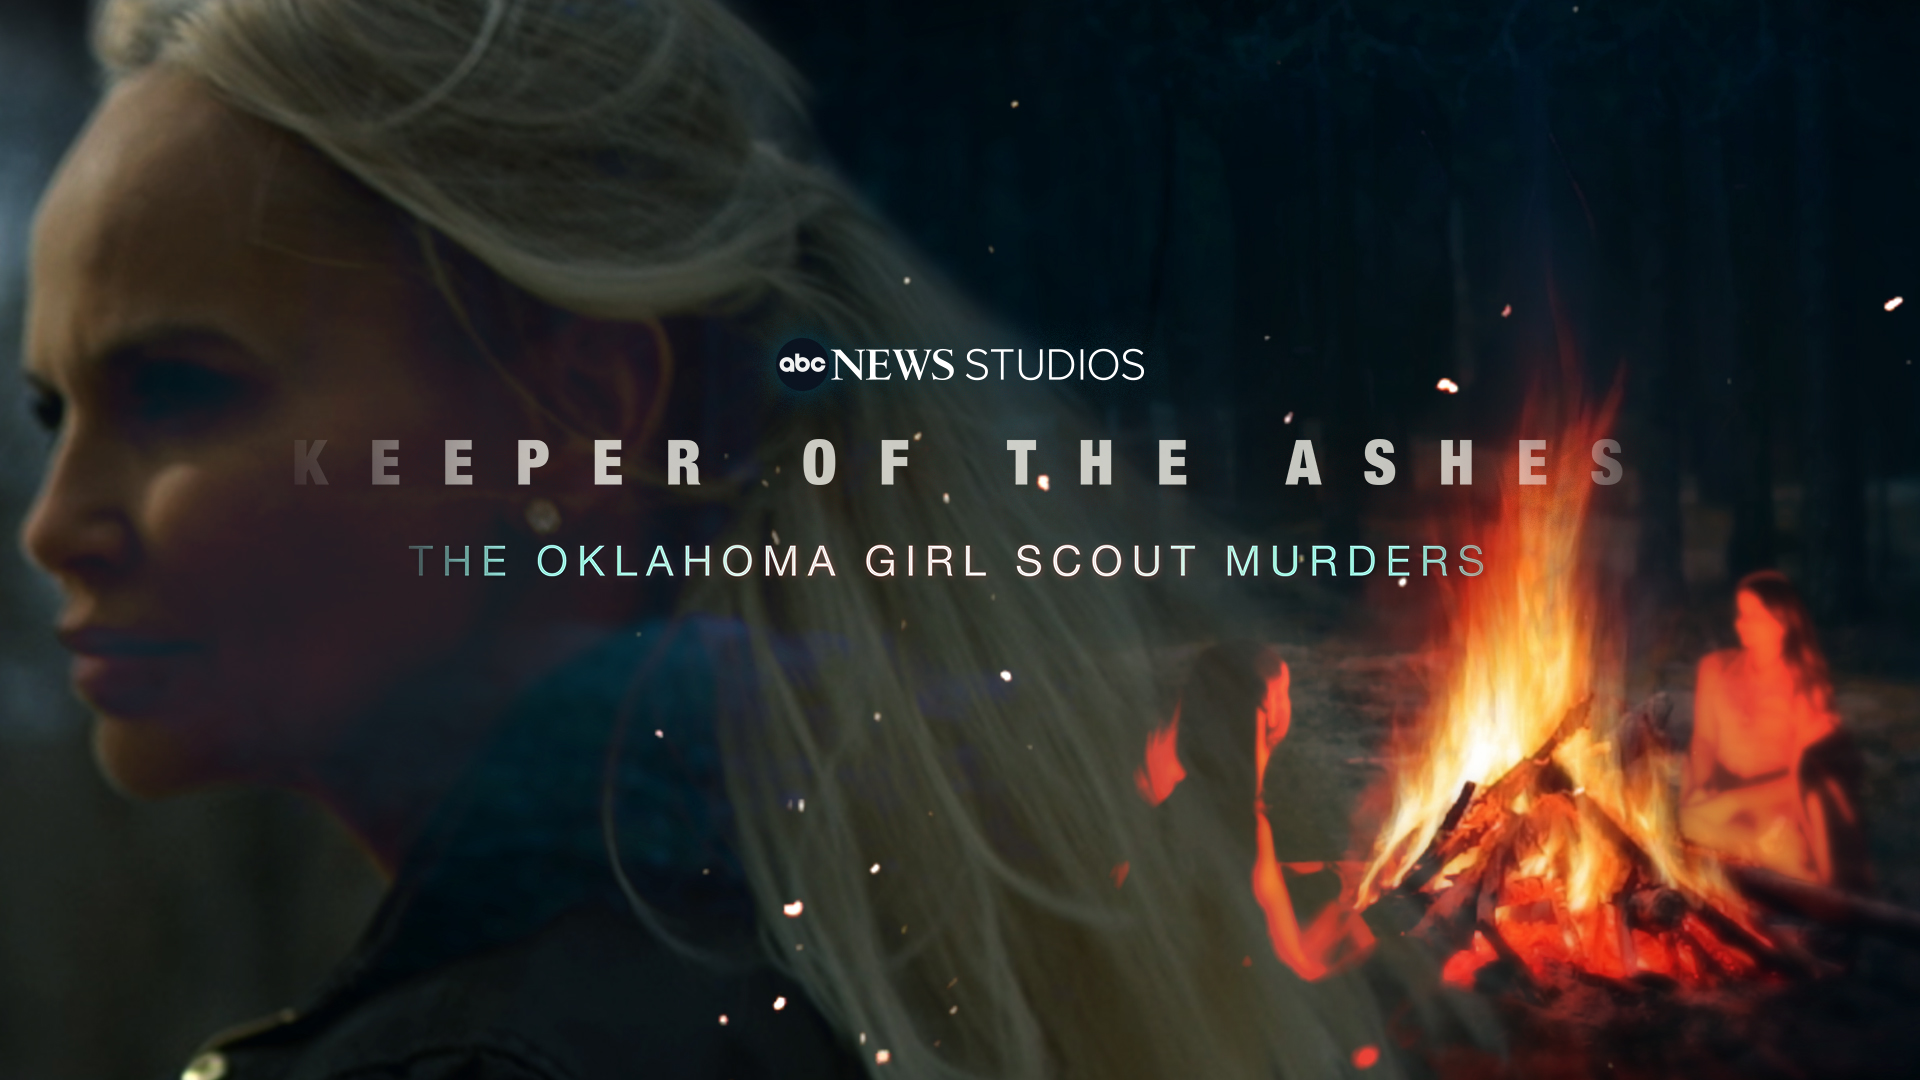  The Oklahoma Girl Scout Murders